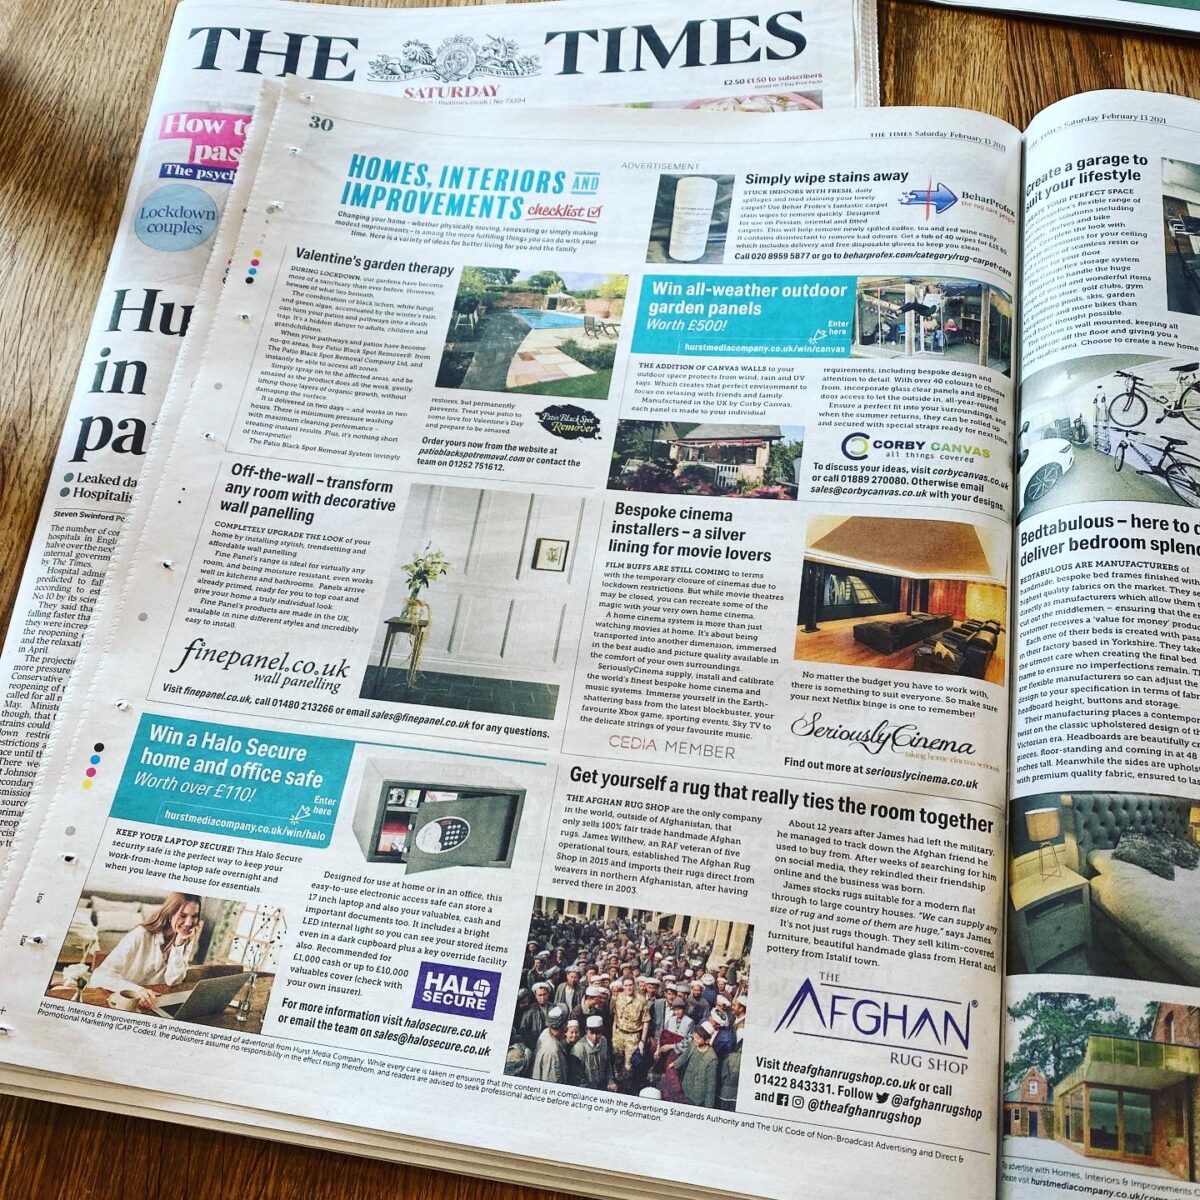 The Times – Interiors